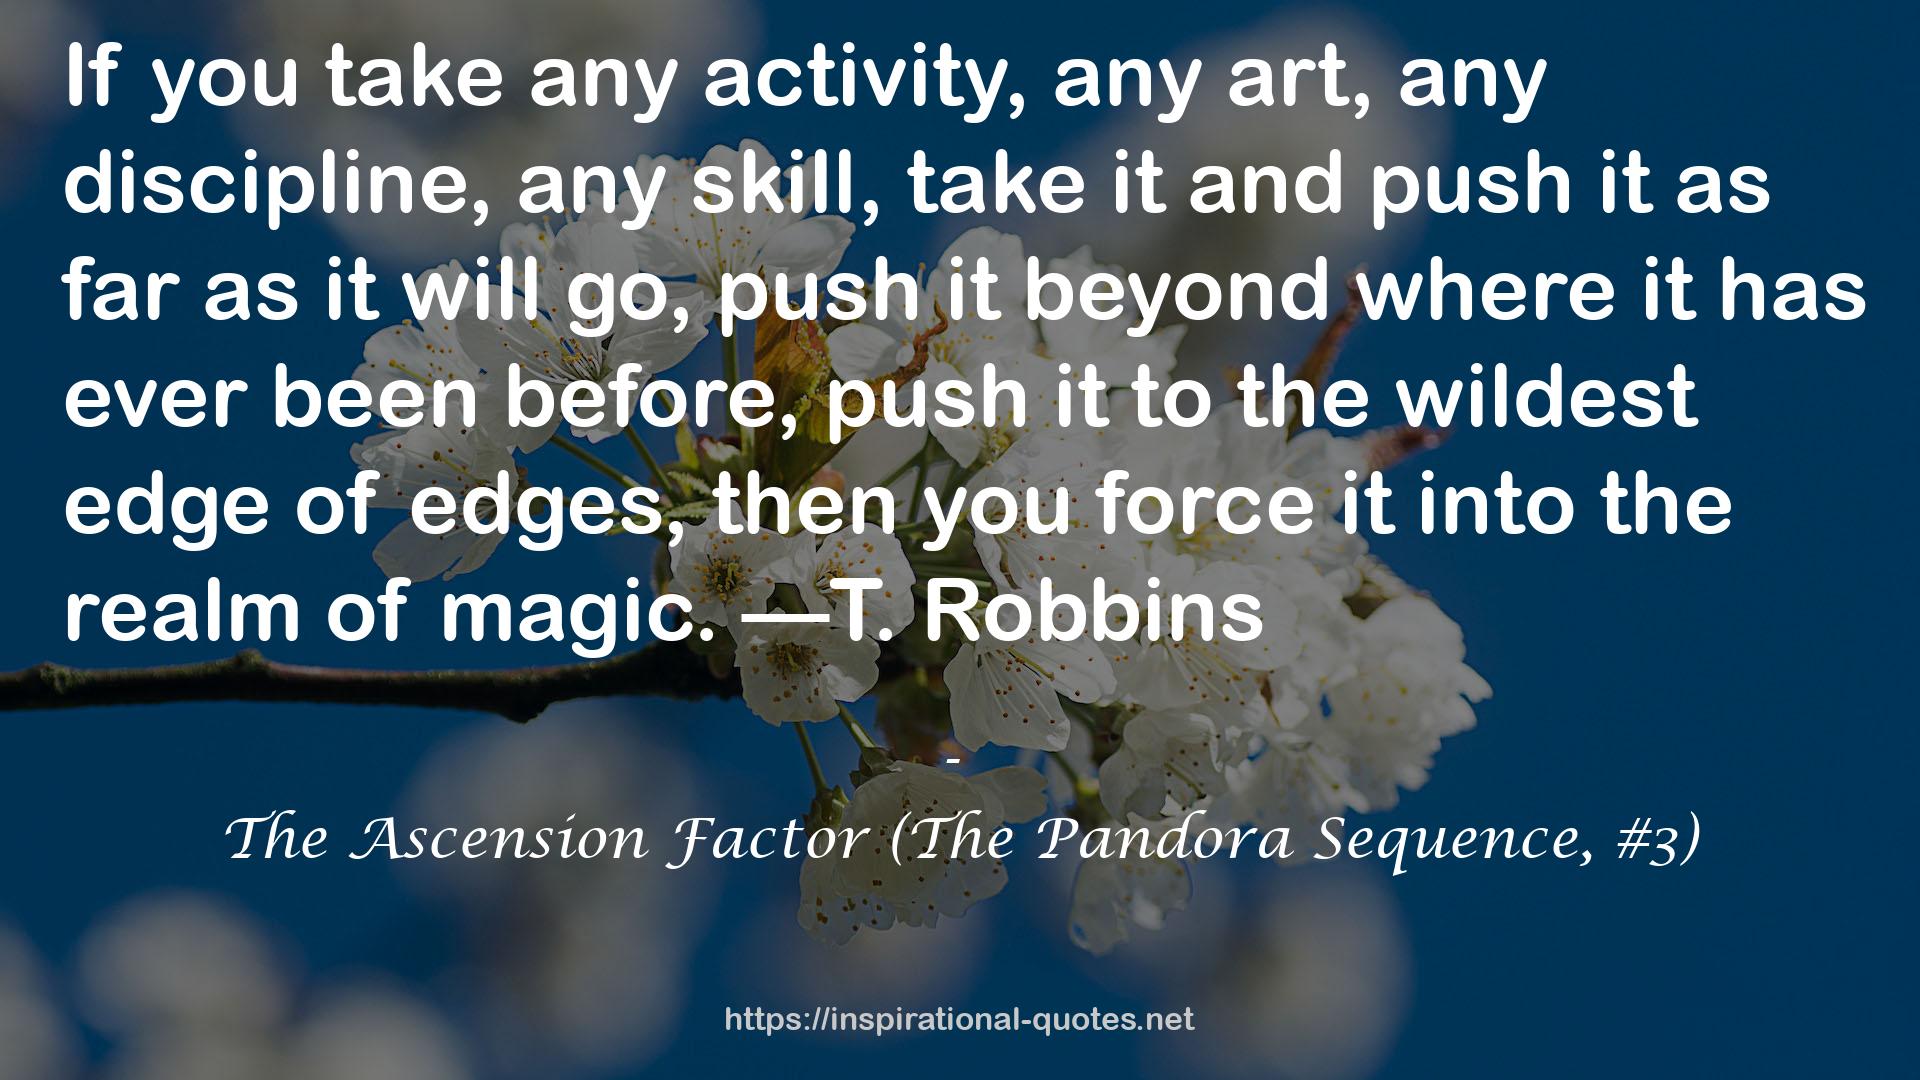 The Ascension Factor (The Pandora Sequence, #3) QUOTES